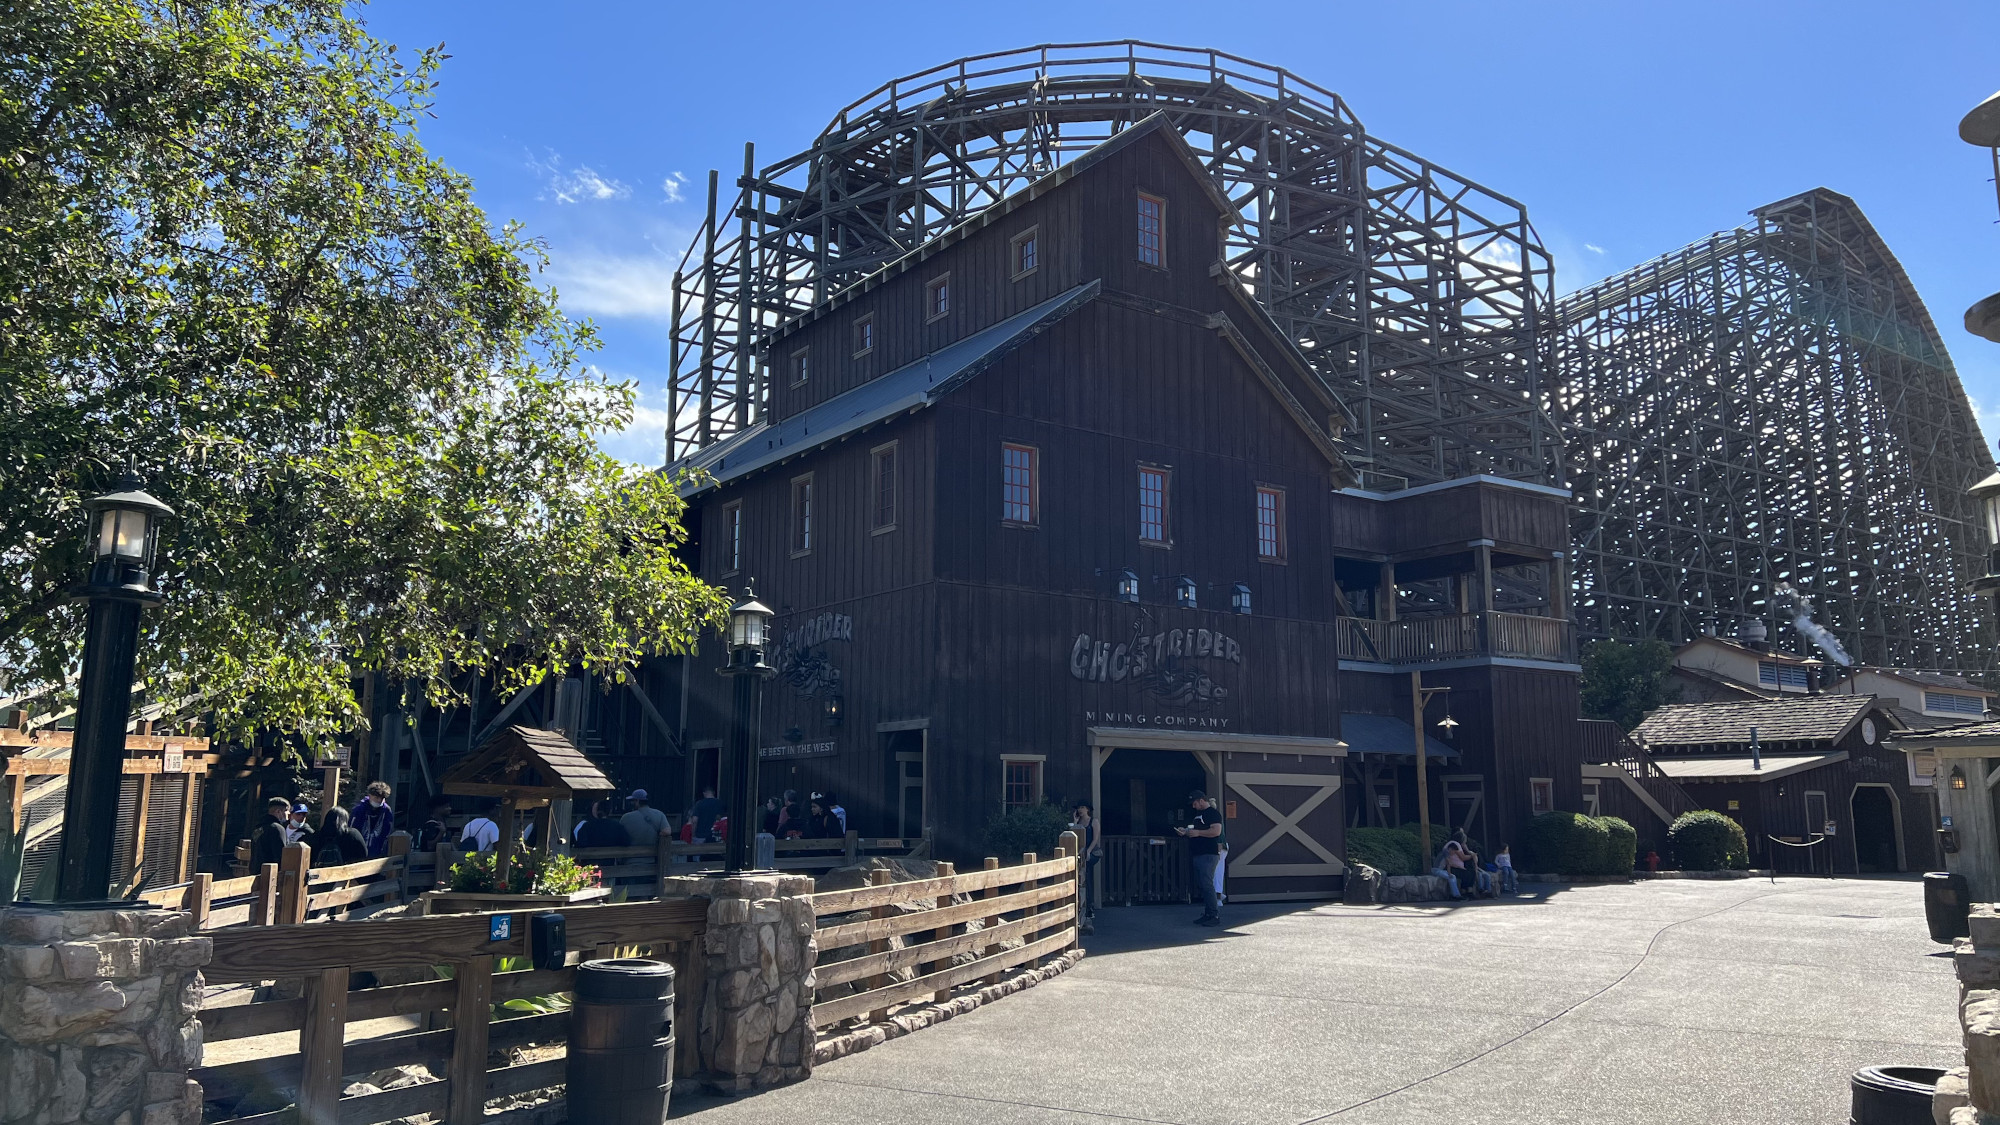 Knott's Berry Farm View of Ghostrider